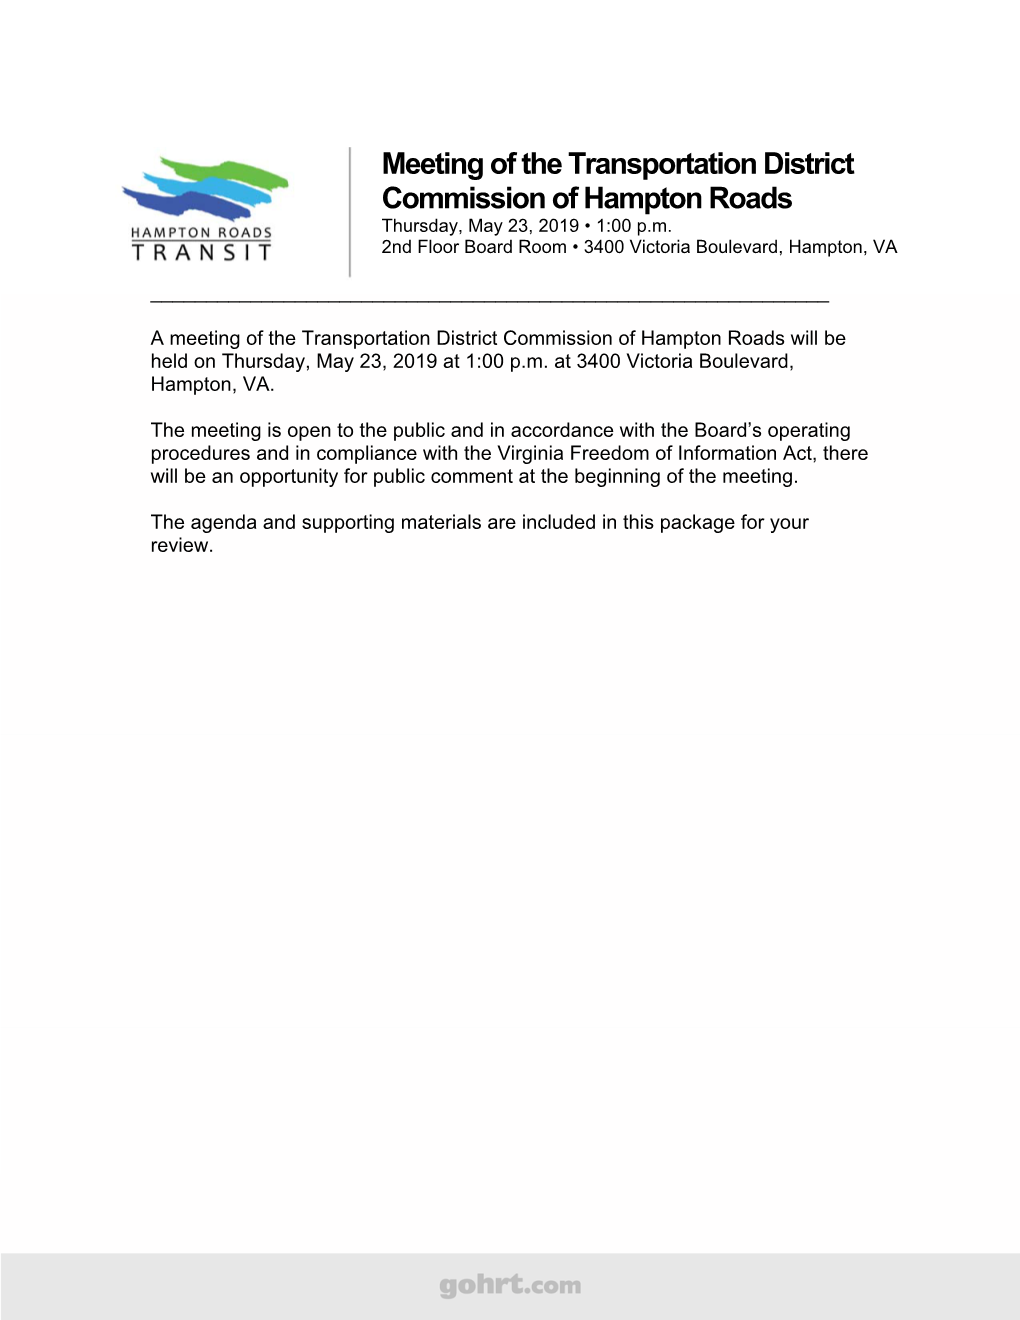 Meeting of the Transportation District Commission of Hampton Roads Thursday, May 23, 2019 • 1:00 P.M